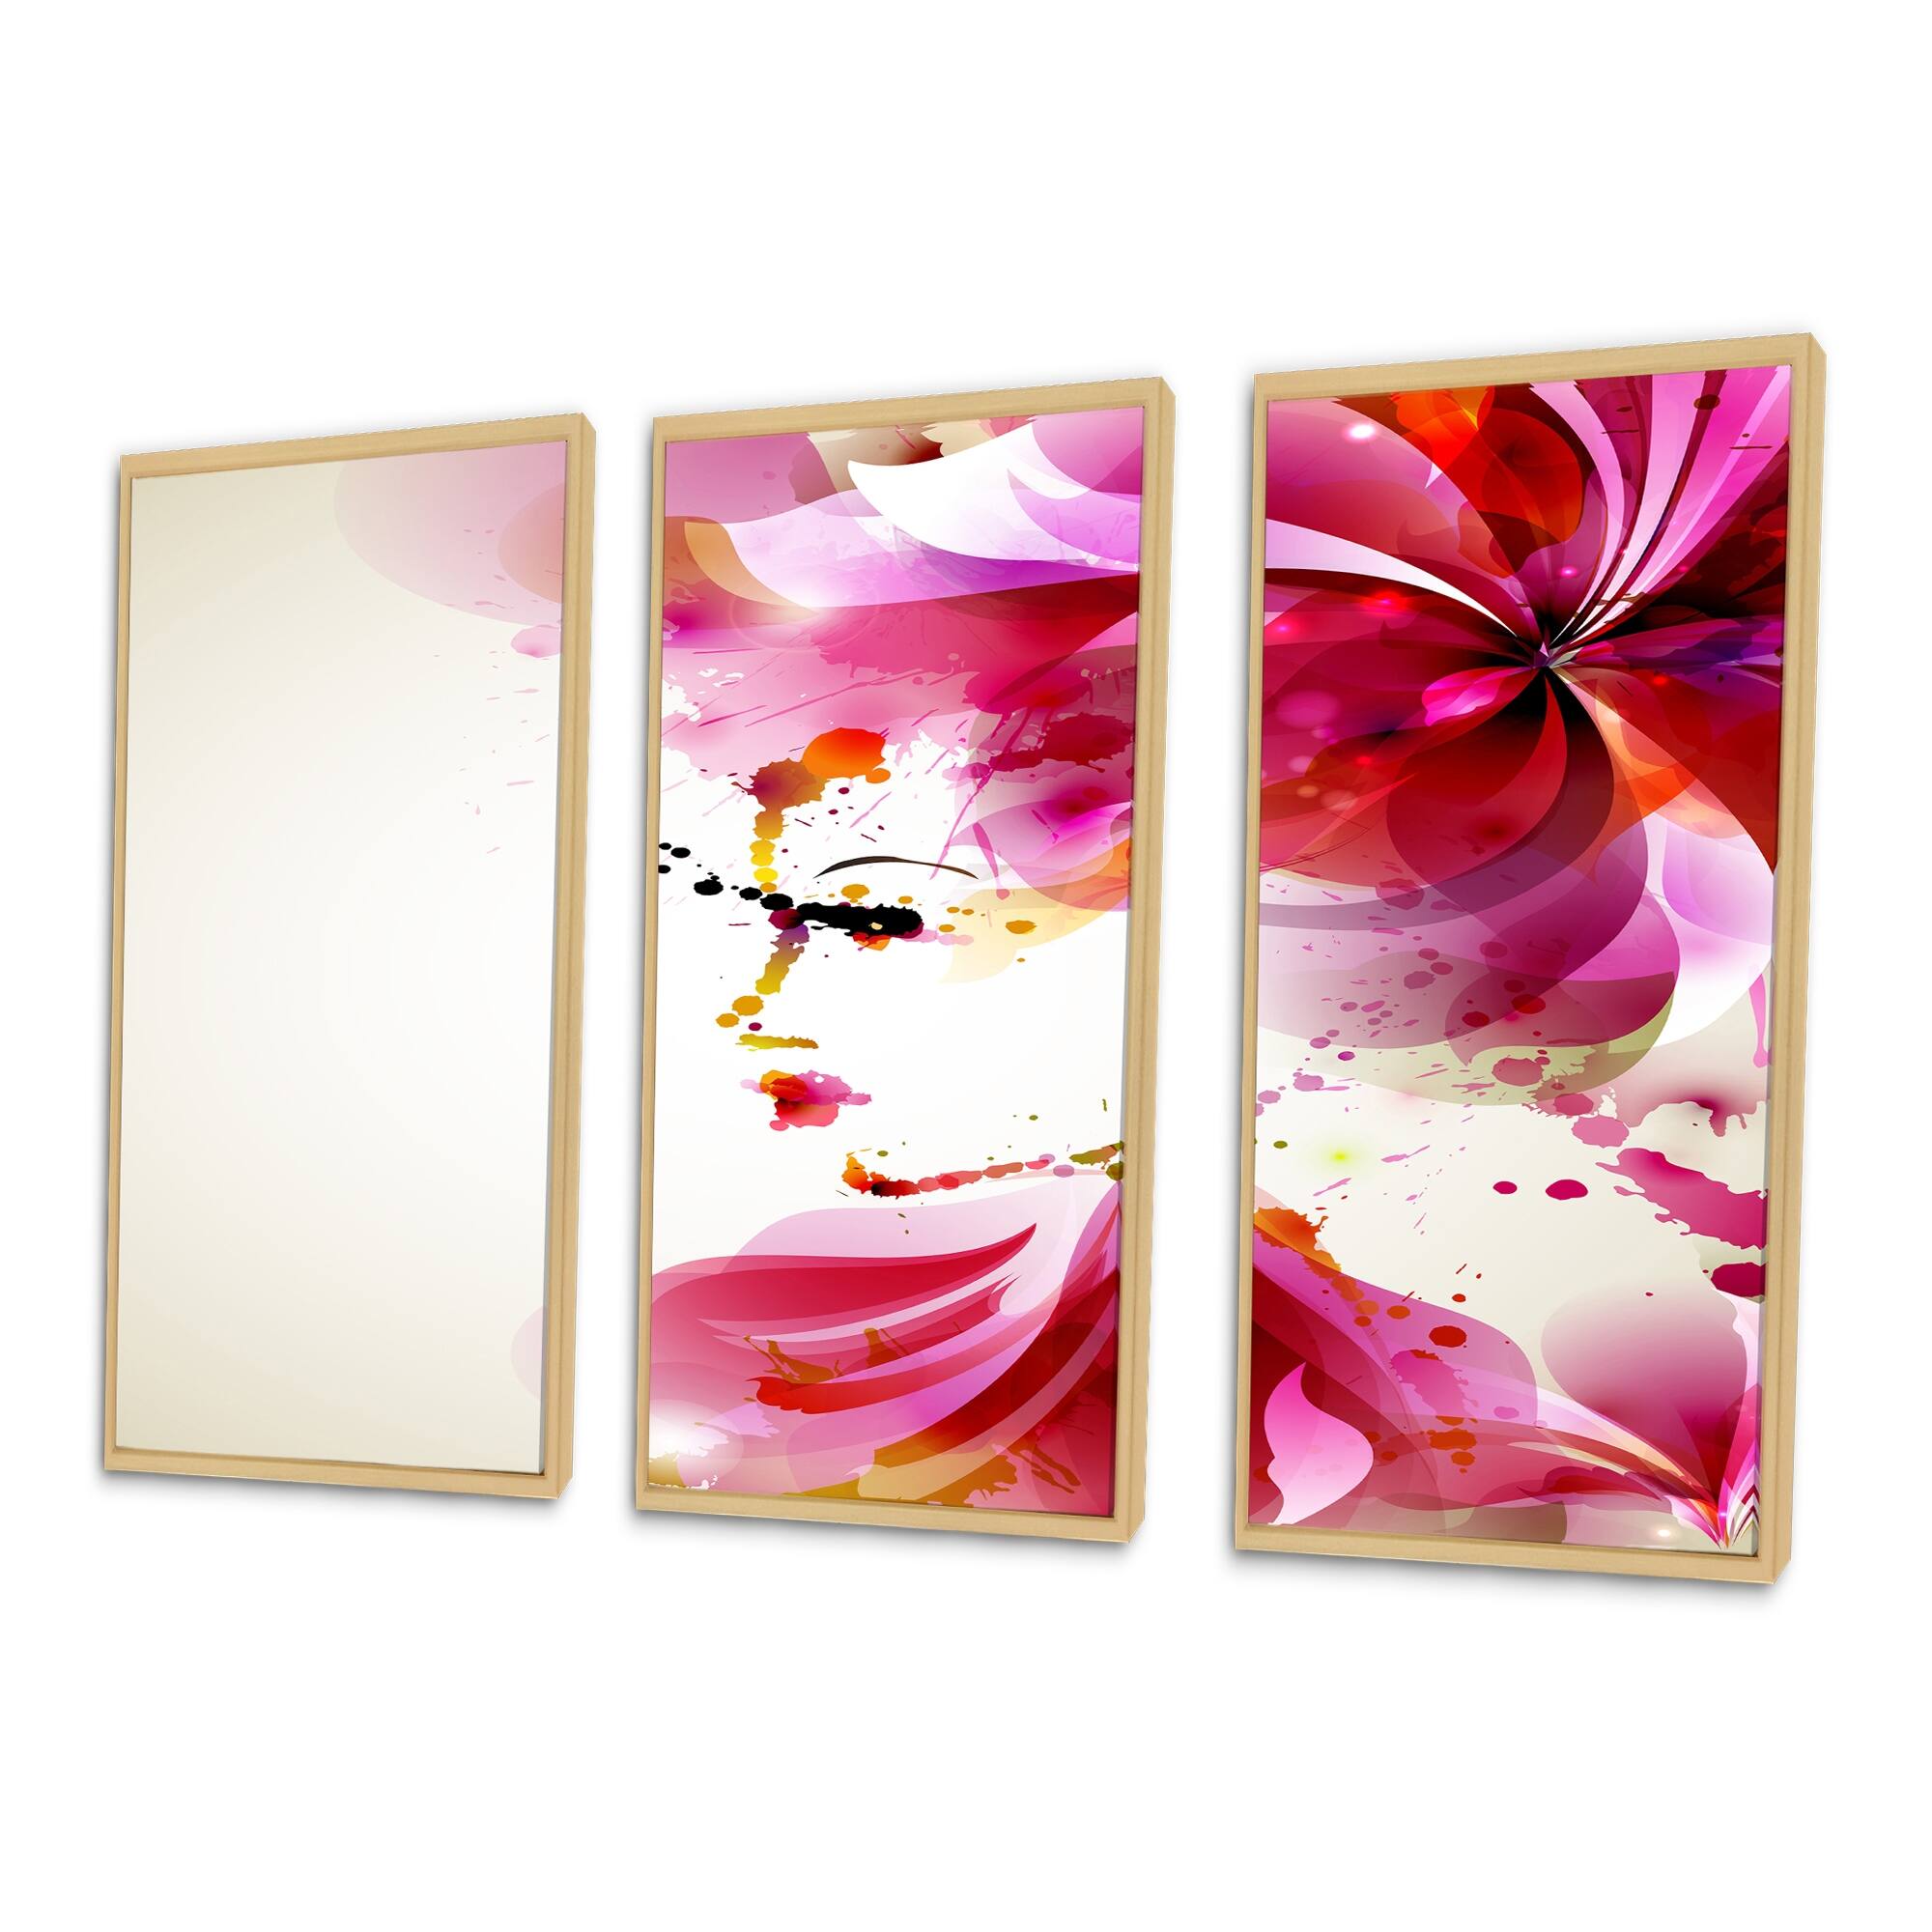 Designart "Fashion Woman with Abstract Hair" Abstract Framed Canvas Wall Art Print Set of 3 - 4 Colors of Frames